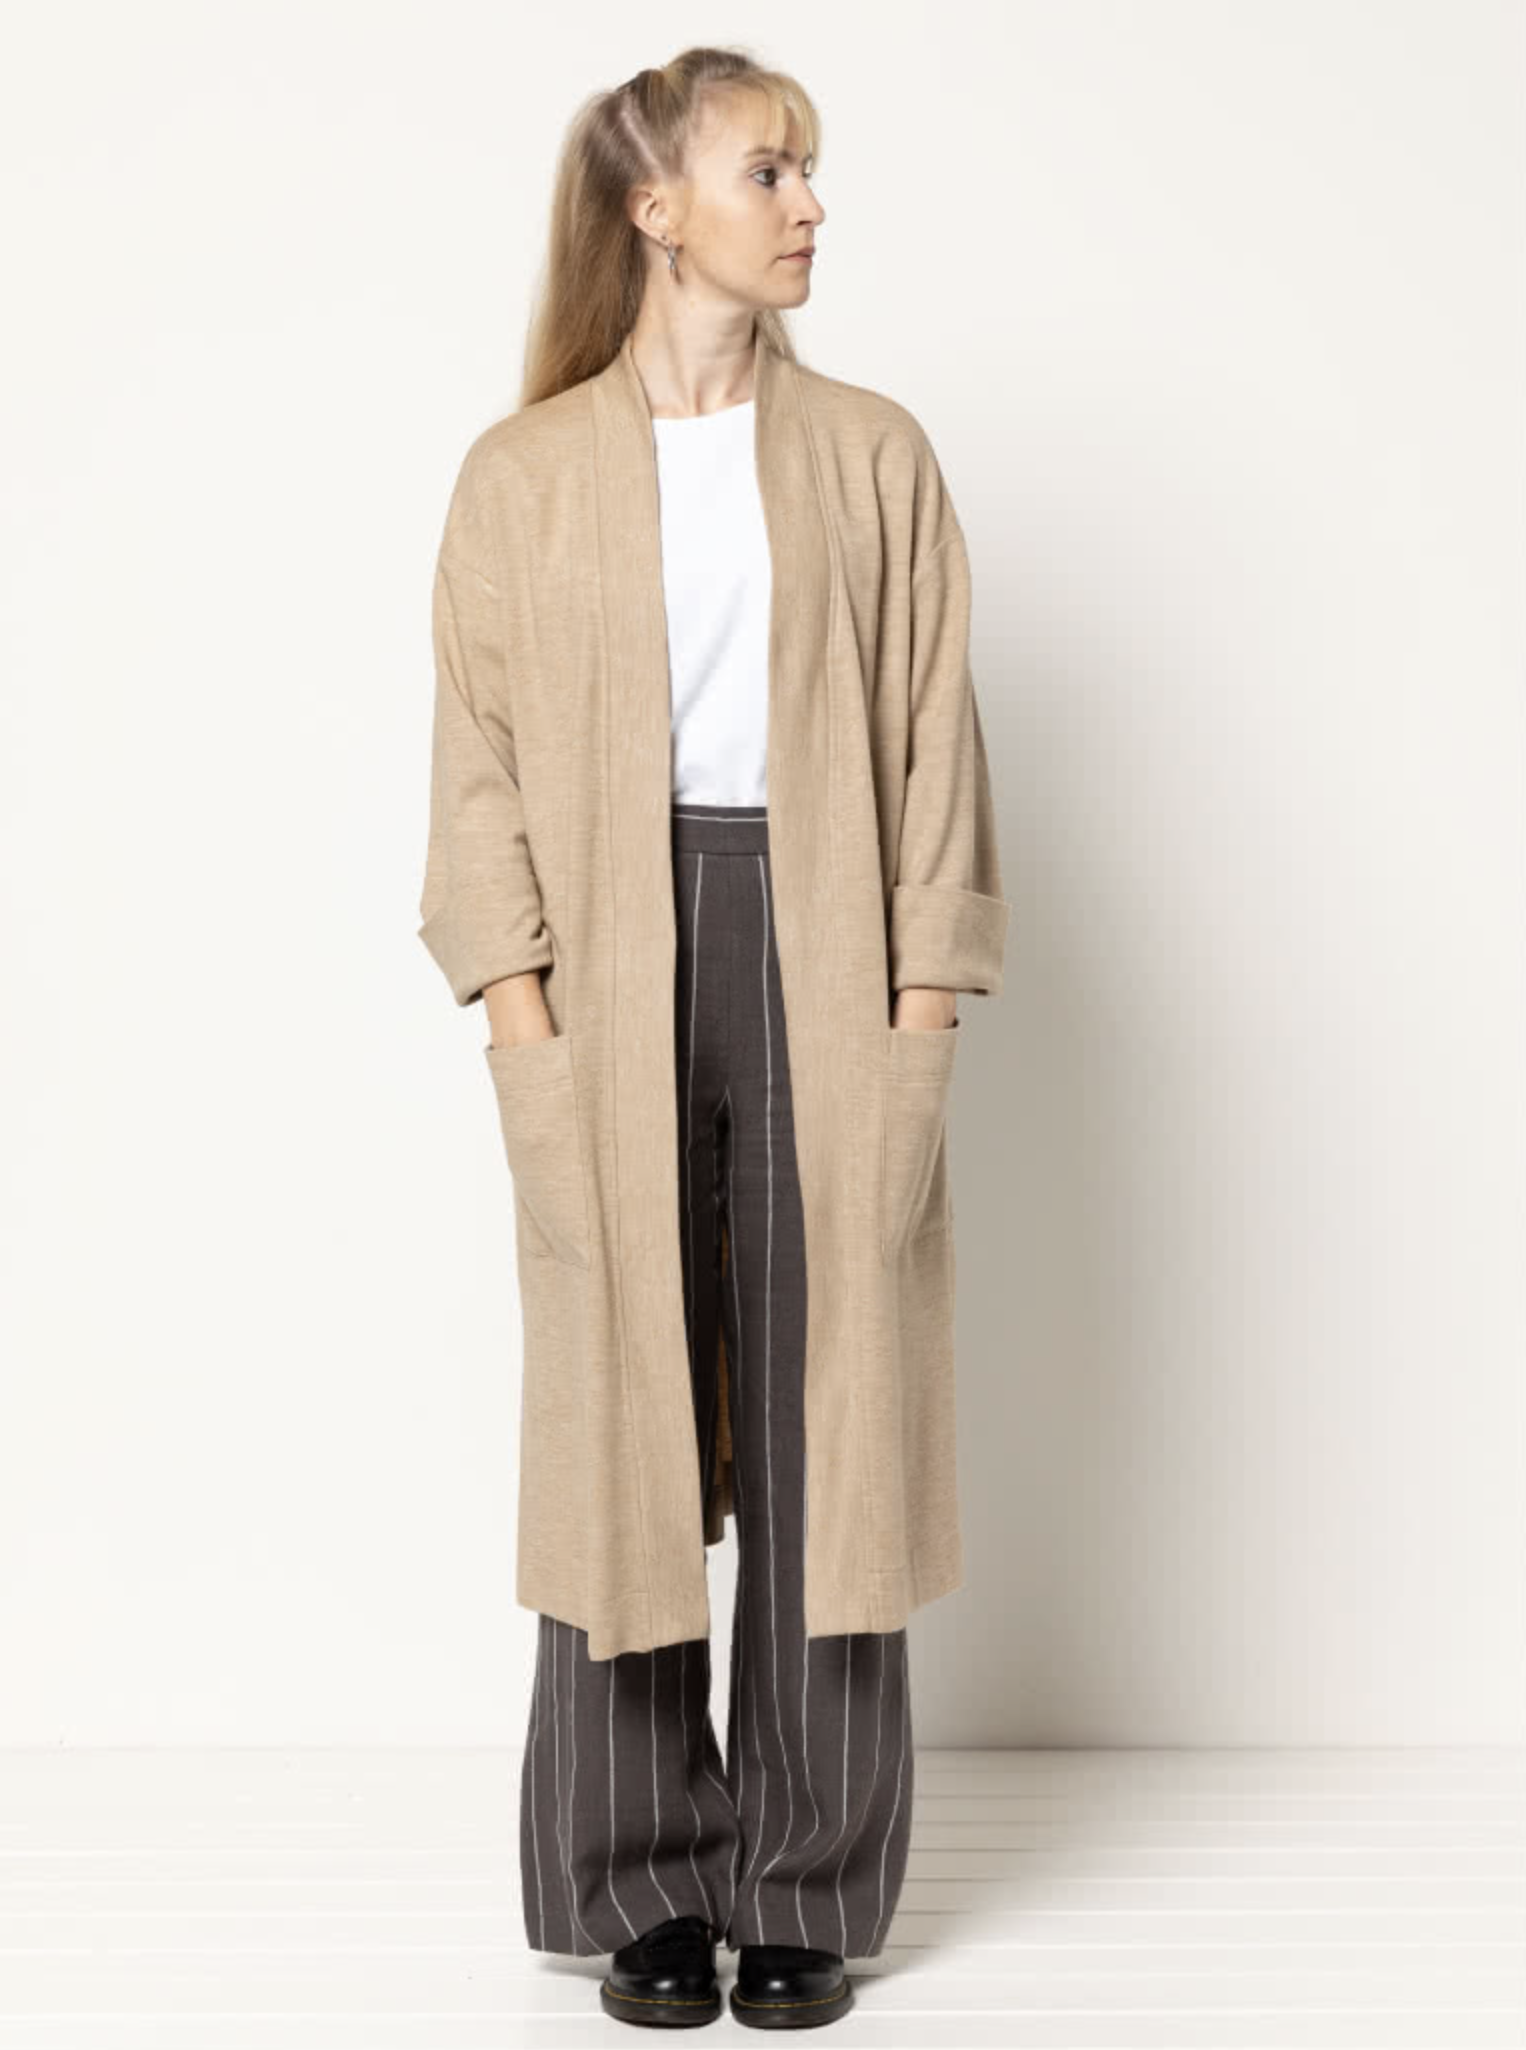 Women wearing the Sigrid Knit Coat sewing pattern from Style Arc on The Fold Line. A knit coat pattern made in sweater knit fabrics, featuring a longline silhouette, patch pockets, full length sleeves with folded over cuffs and hem with side splits.